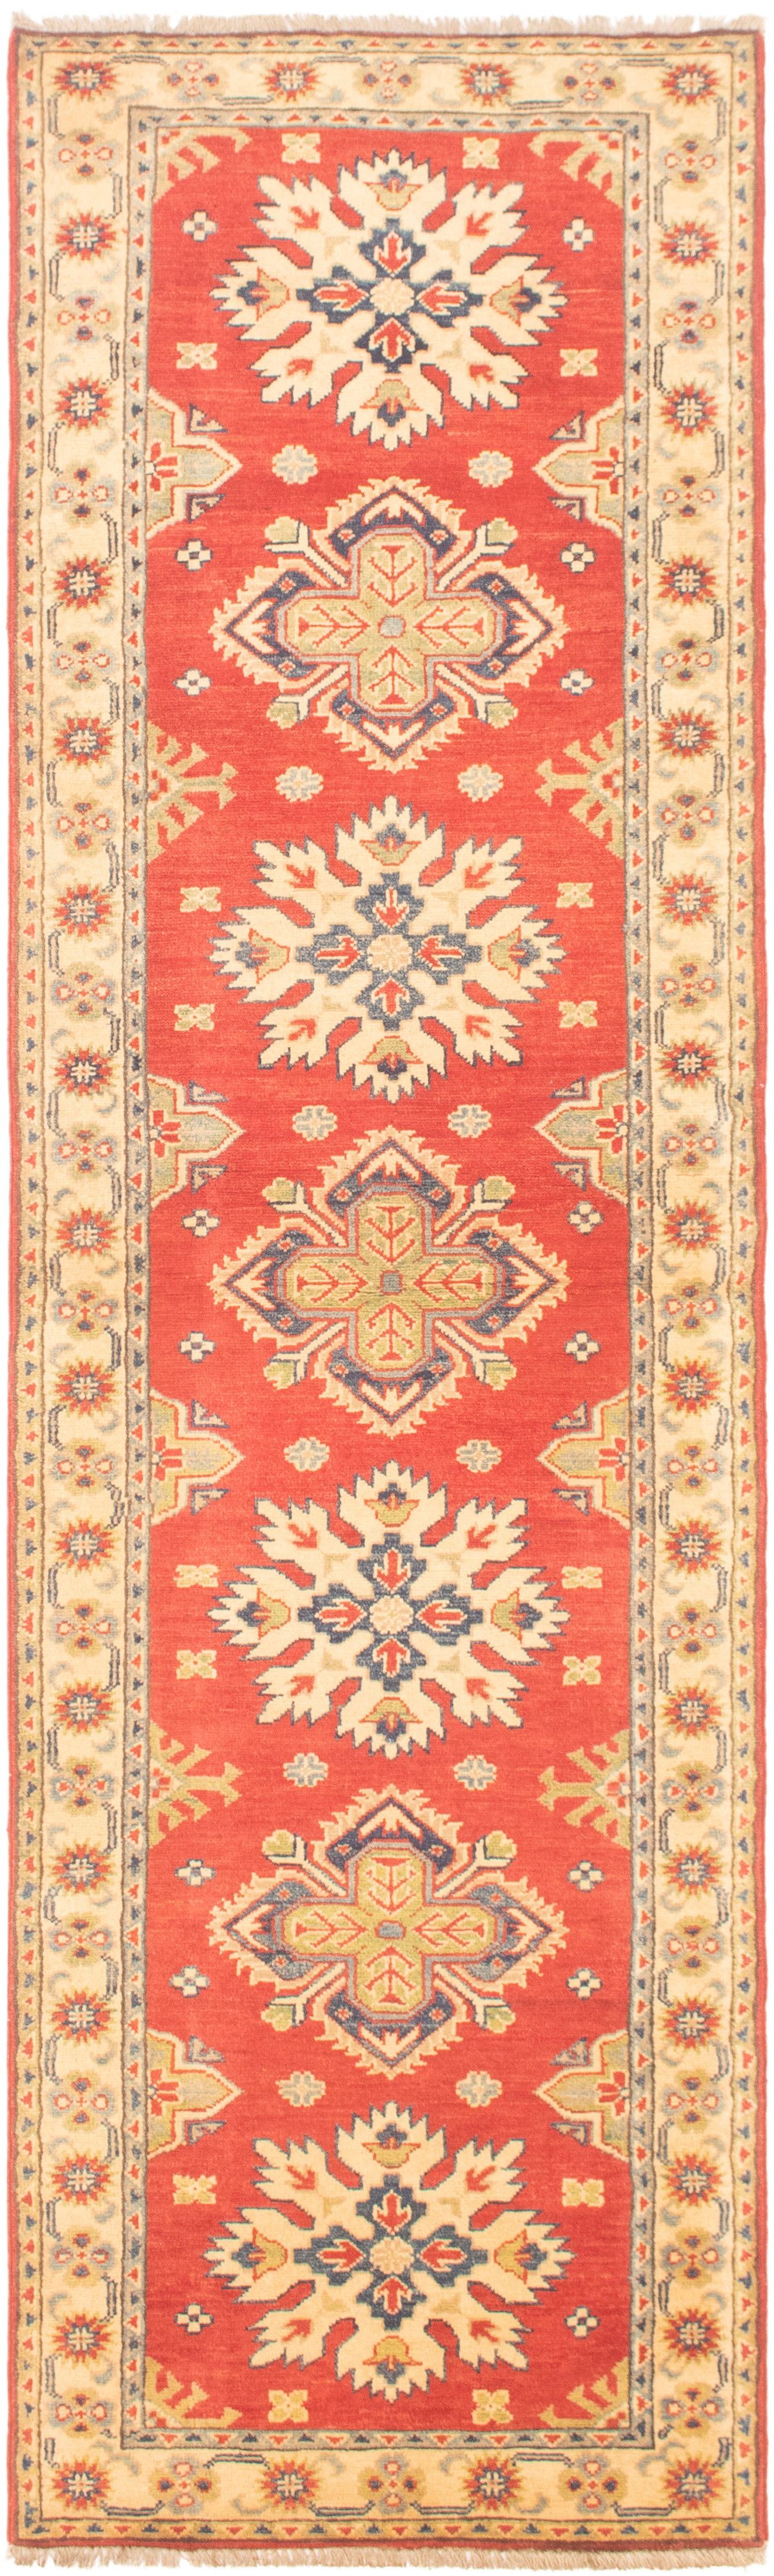 Hand-knotted Finest Gazni Red Wool Rug 2'7" x 9'6"  Size: 2'7" x 9'6"  